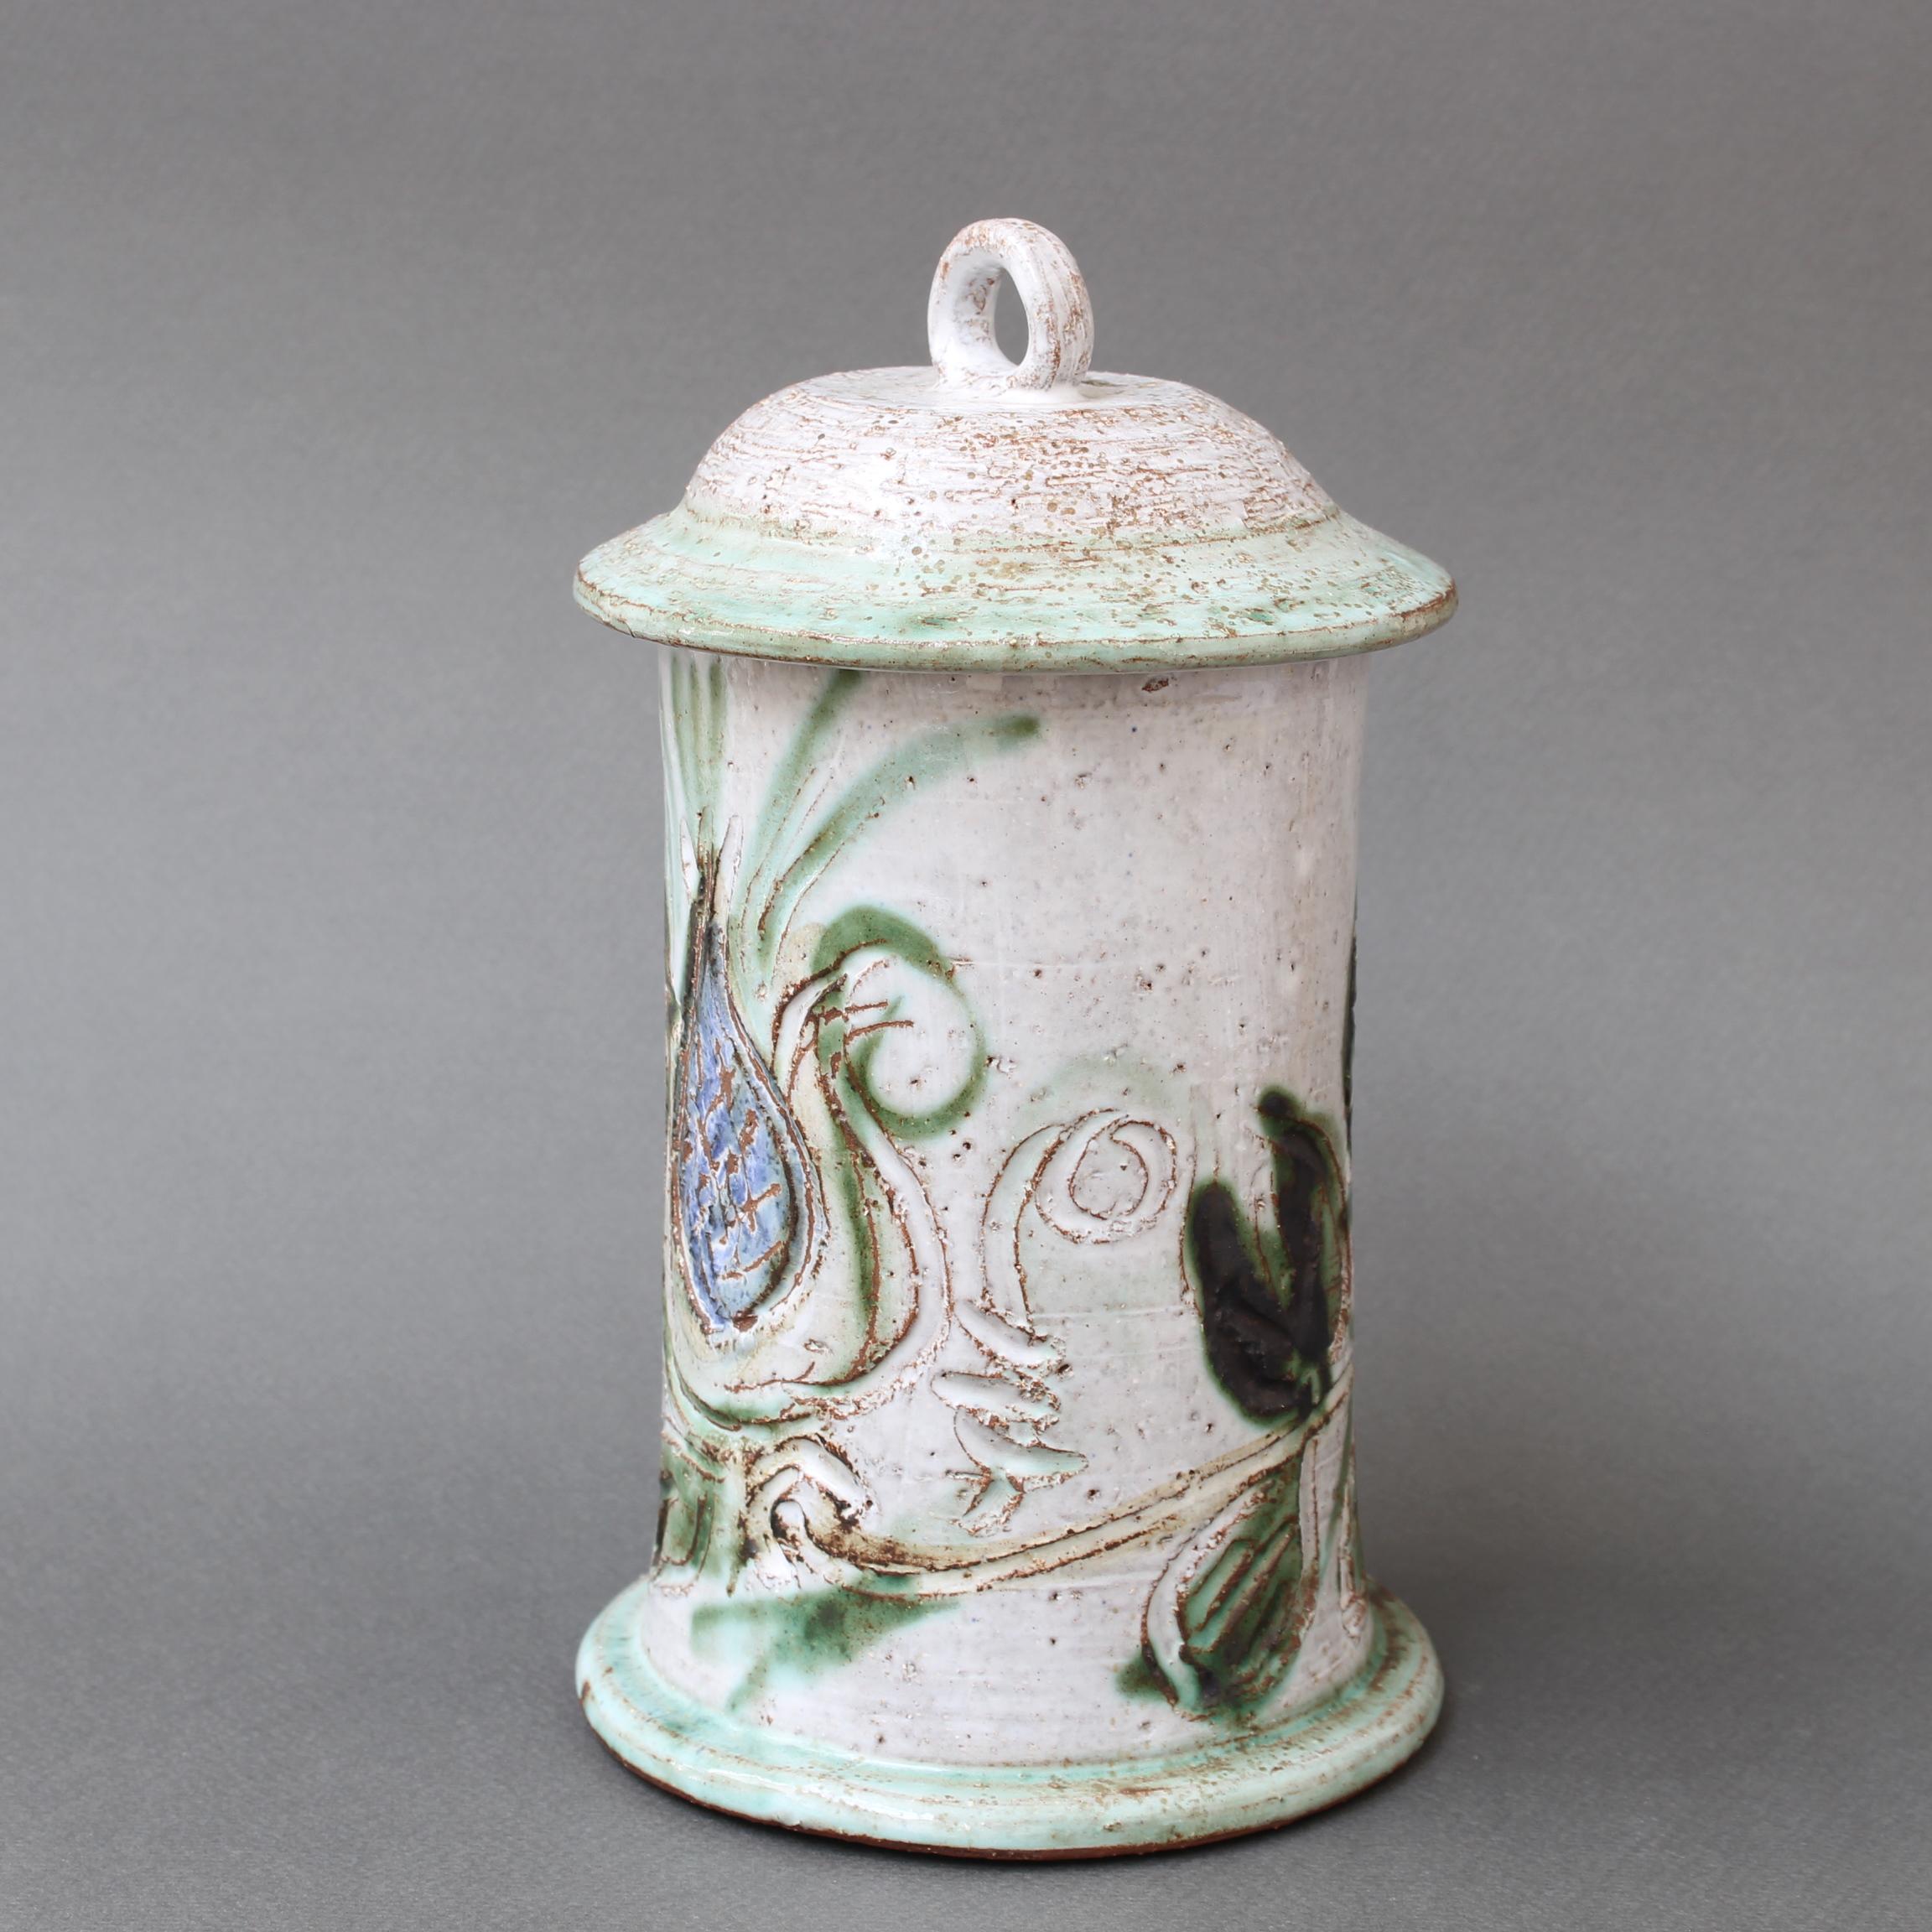 Mid-century French ceramic apothecary jar by Albert Thiry (circa 1960s). A delightful piece with Thiry's signature style, chalk-white base with blue thistle and foliage painted motif. A charming bell-shaped cover tops the piece in a creamy white